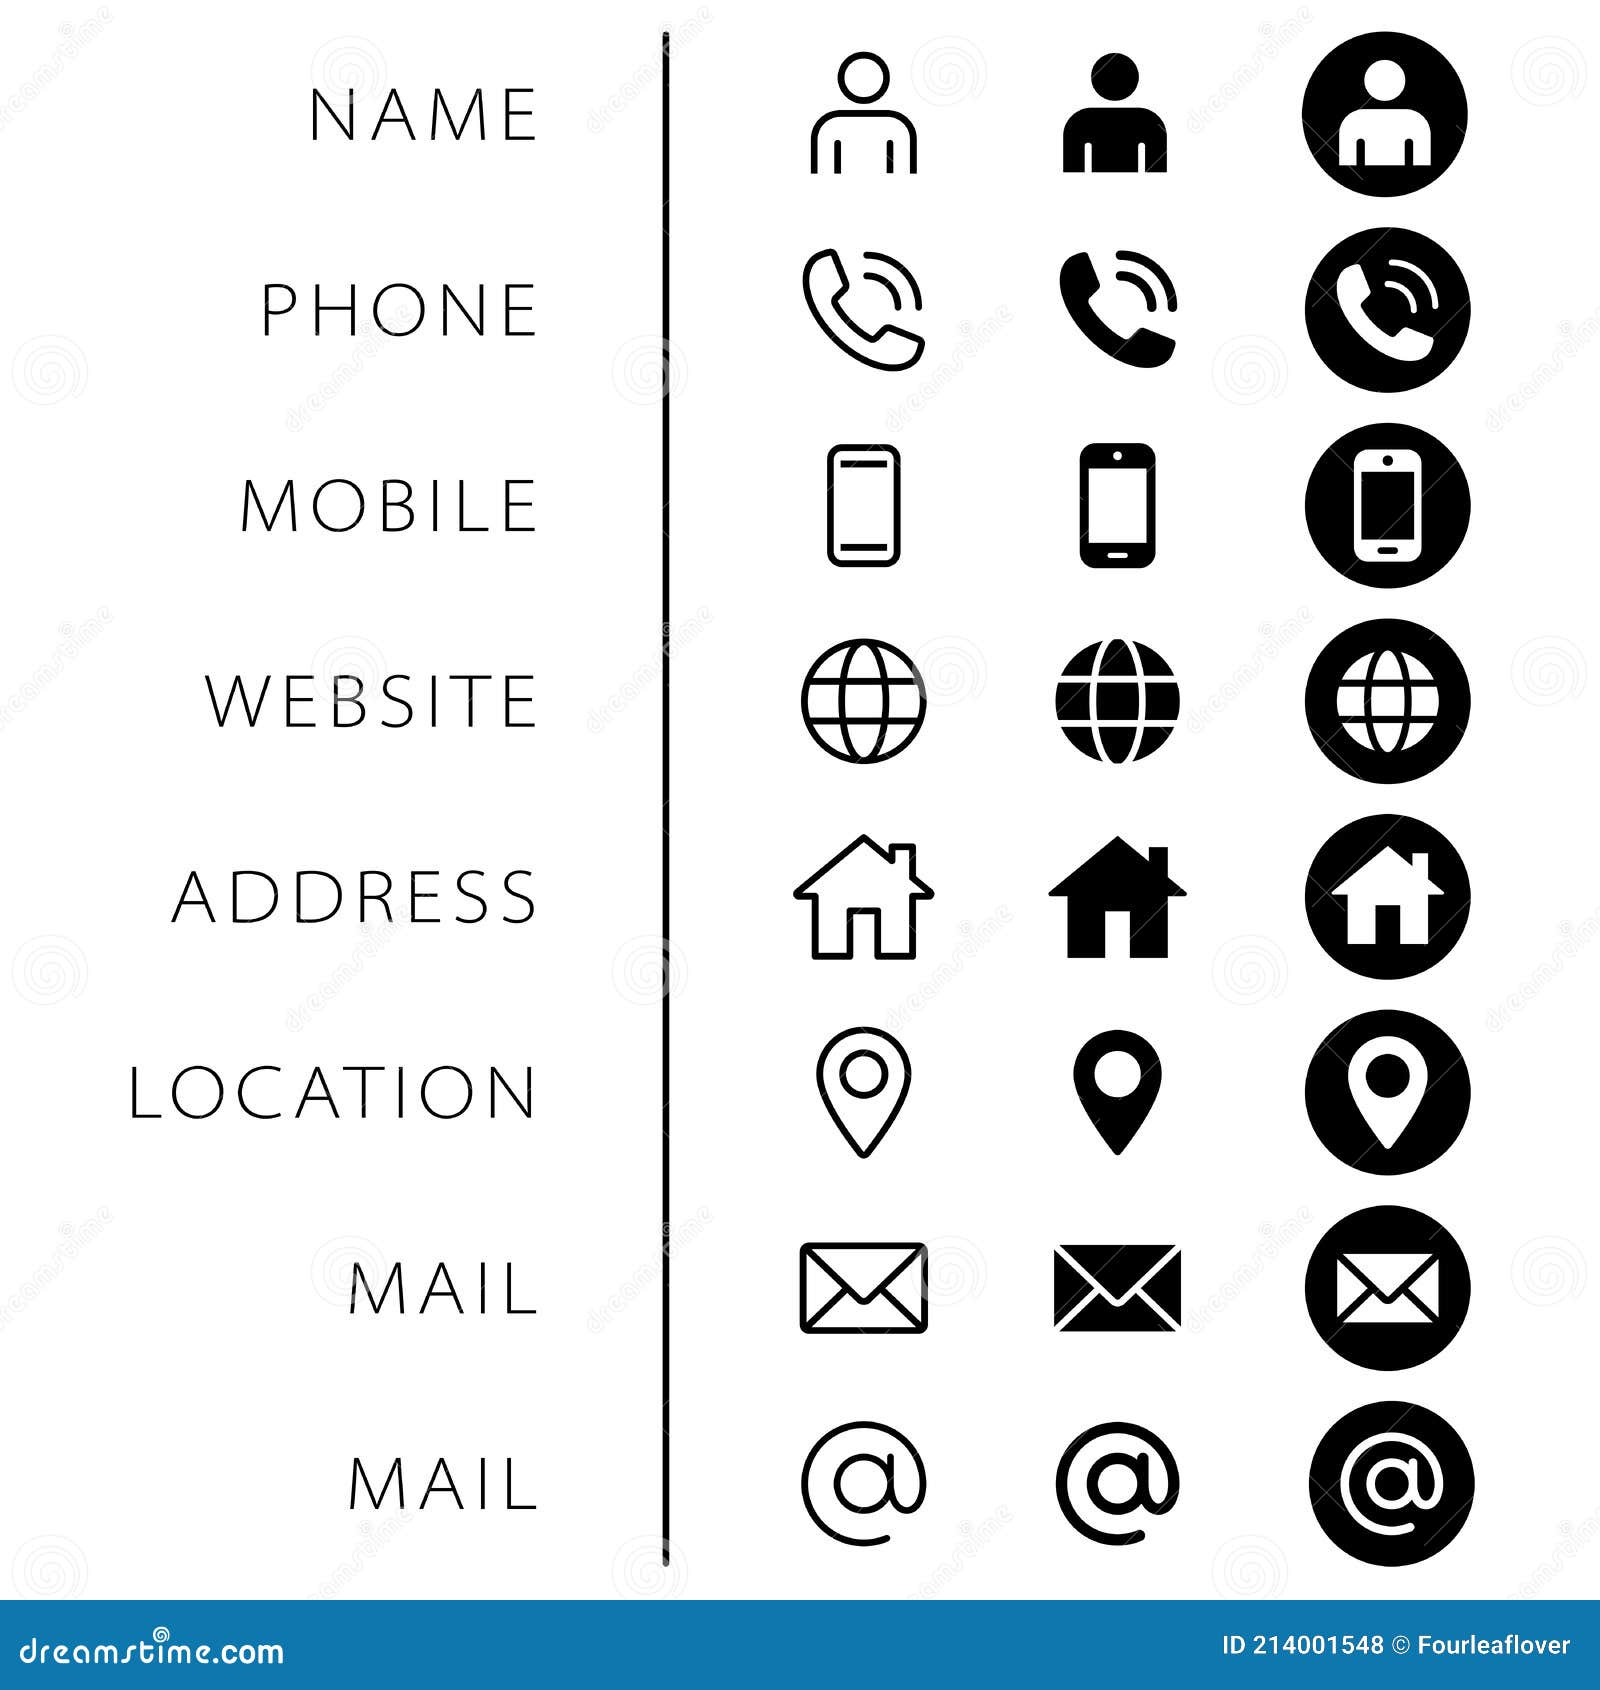 company connection business card icon set. phone, name, website, address, location and mail logo  sign pack.